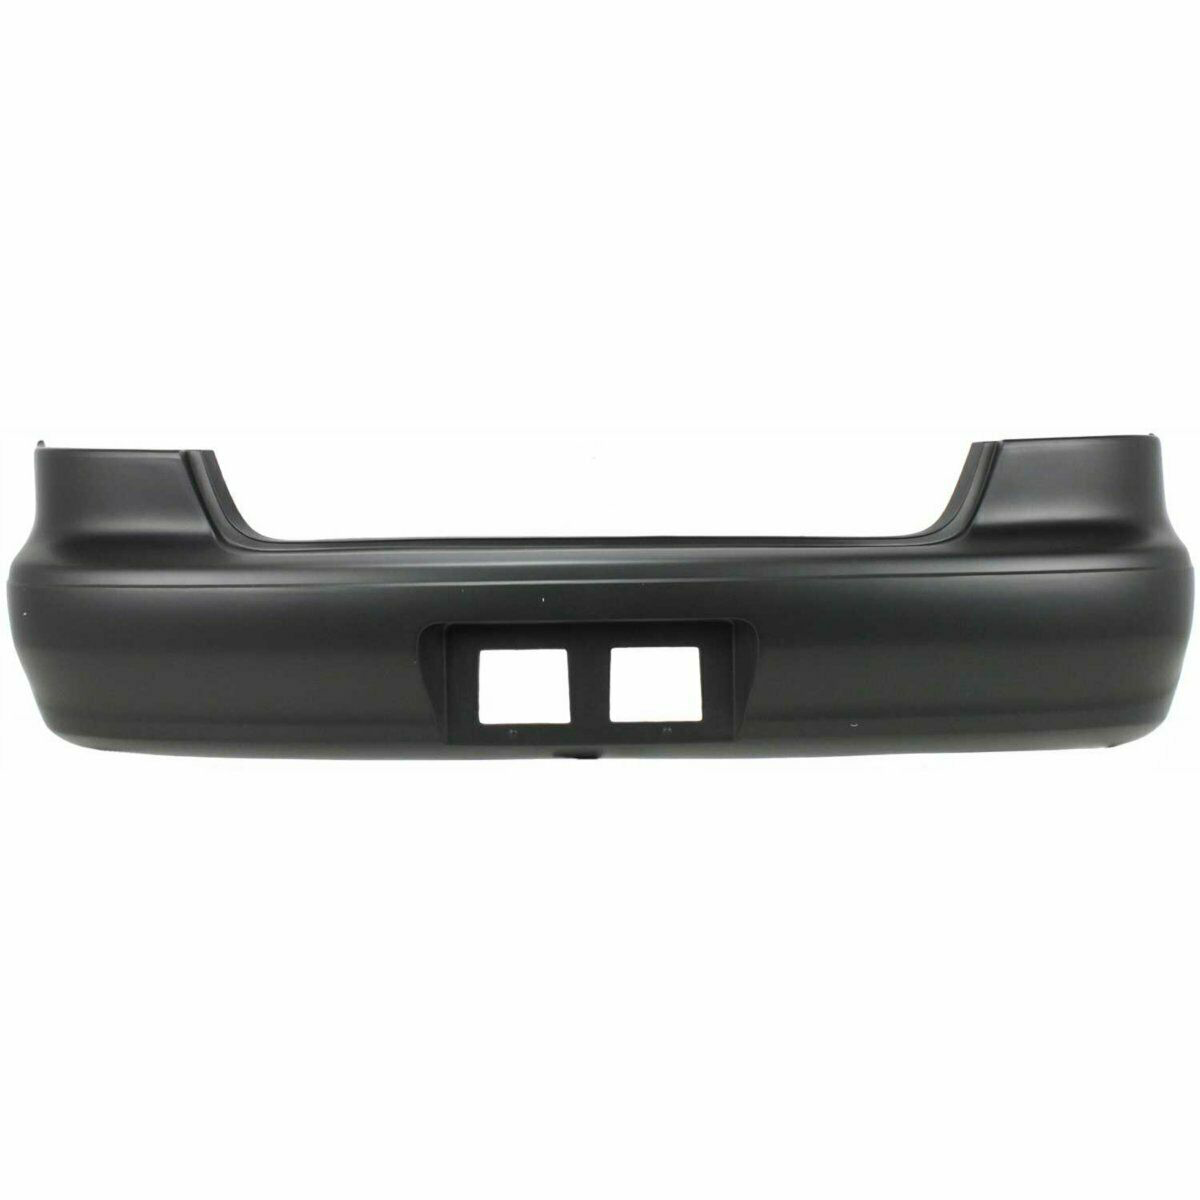 1998-2000 Toyota Corolla Rear Bumper Painted to Match